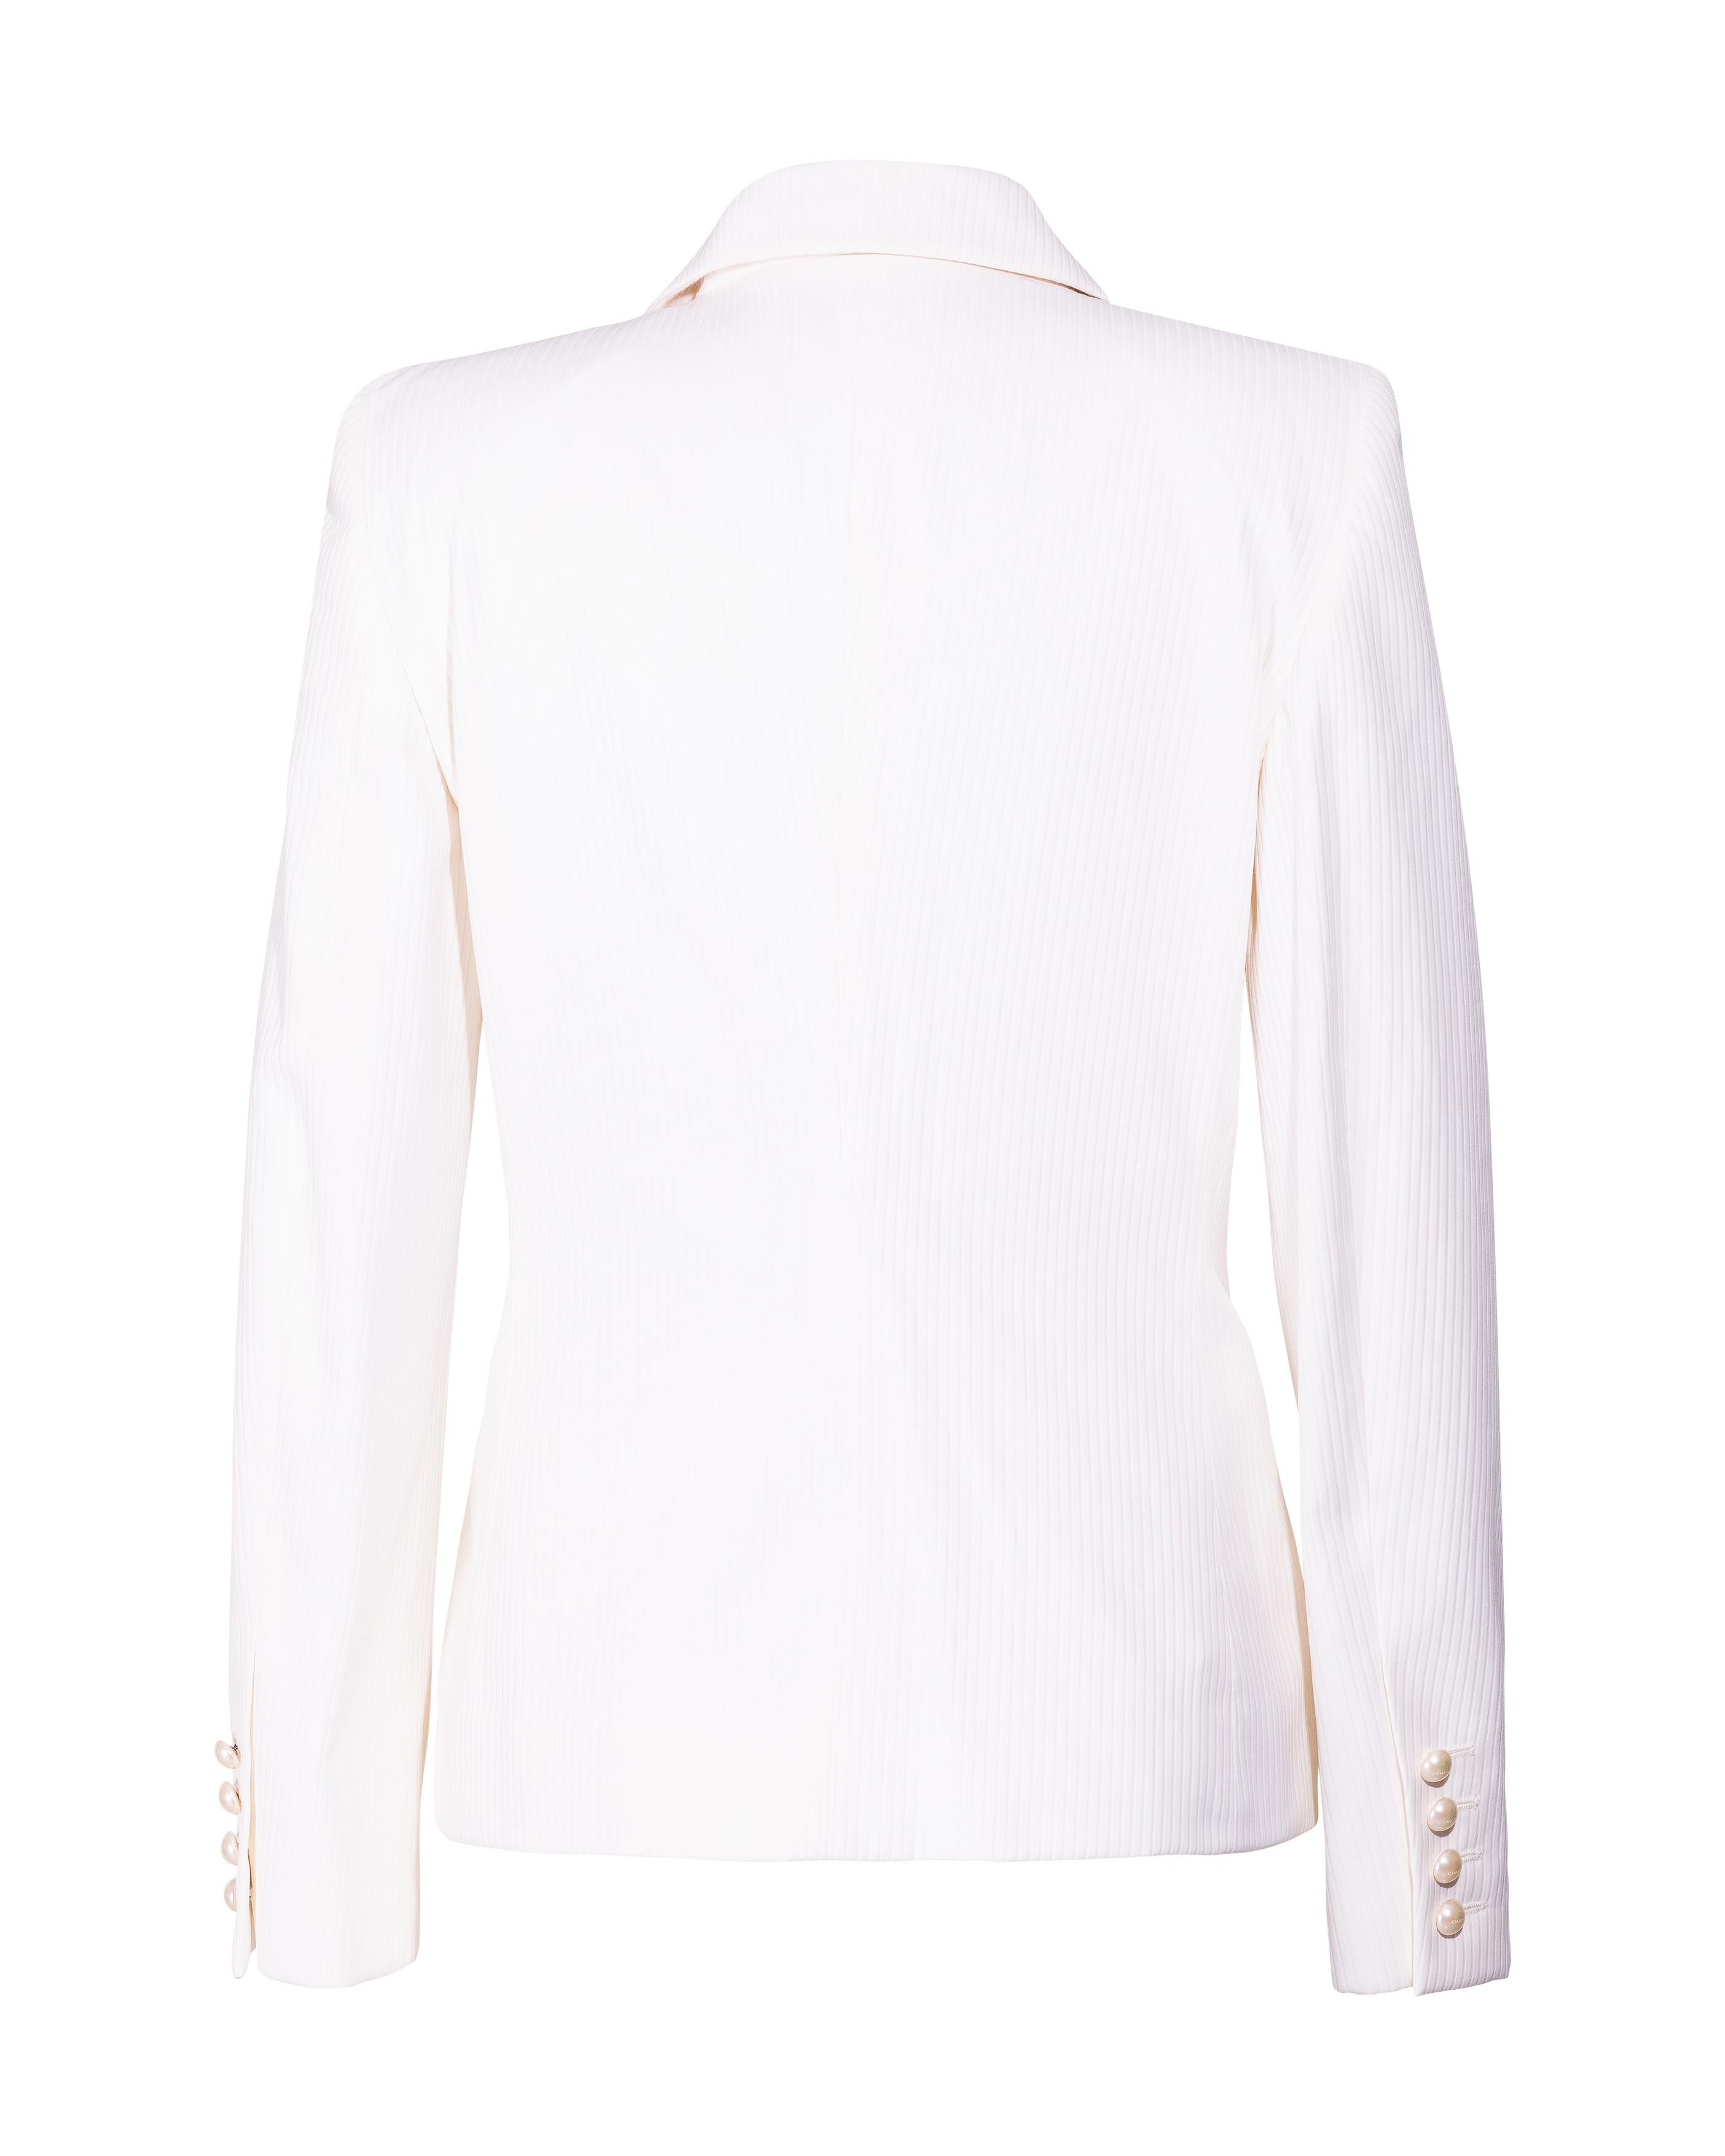 S/S 2001 Chanel Double-Breasted White Suit Set 9